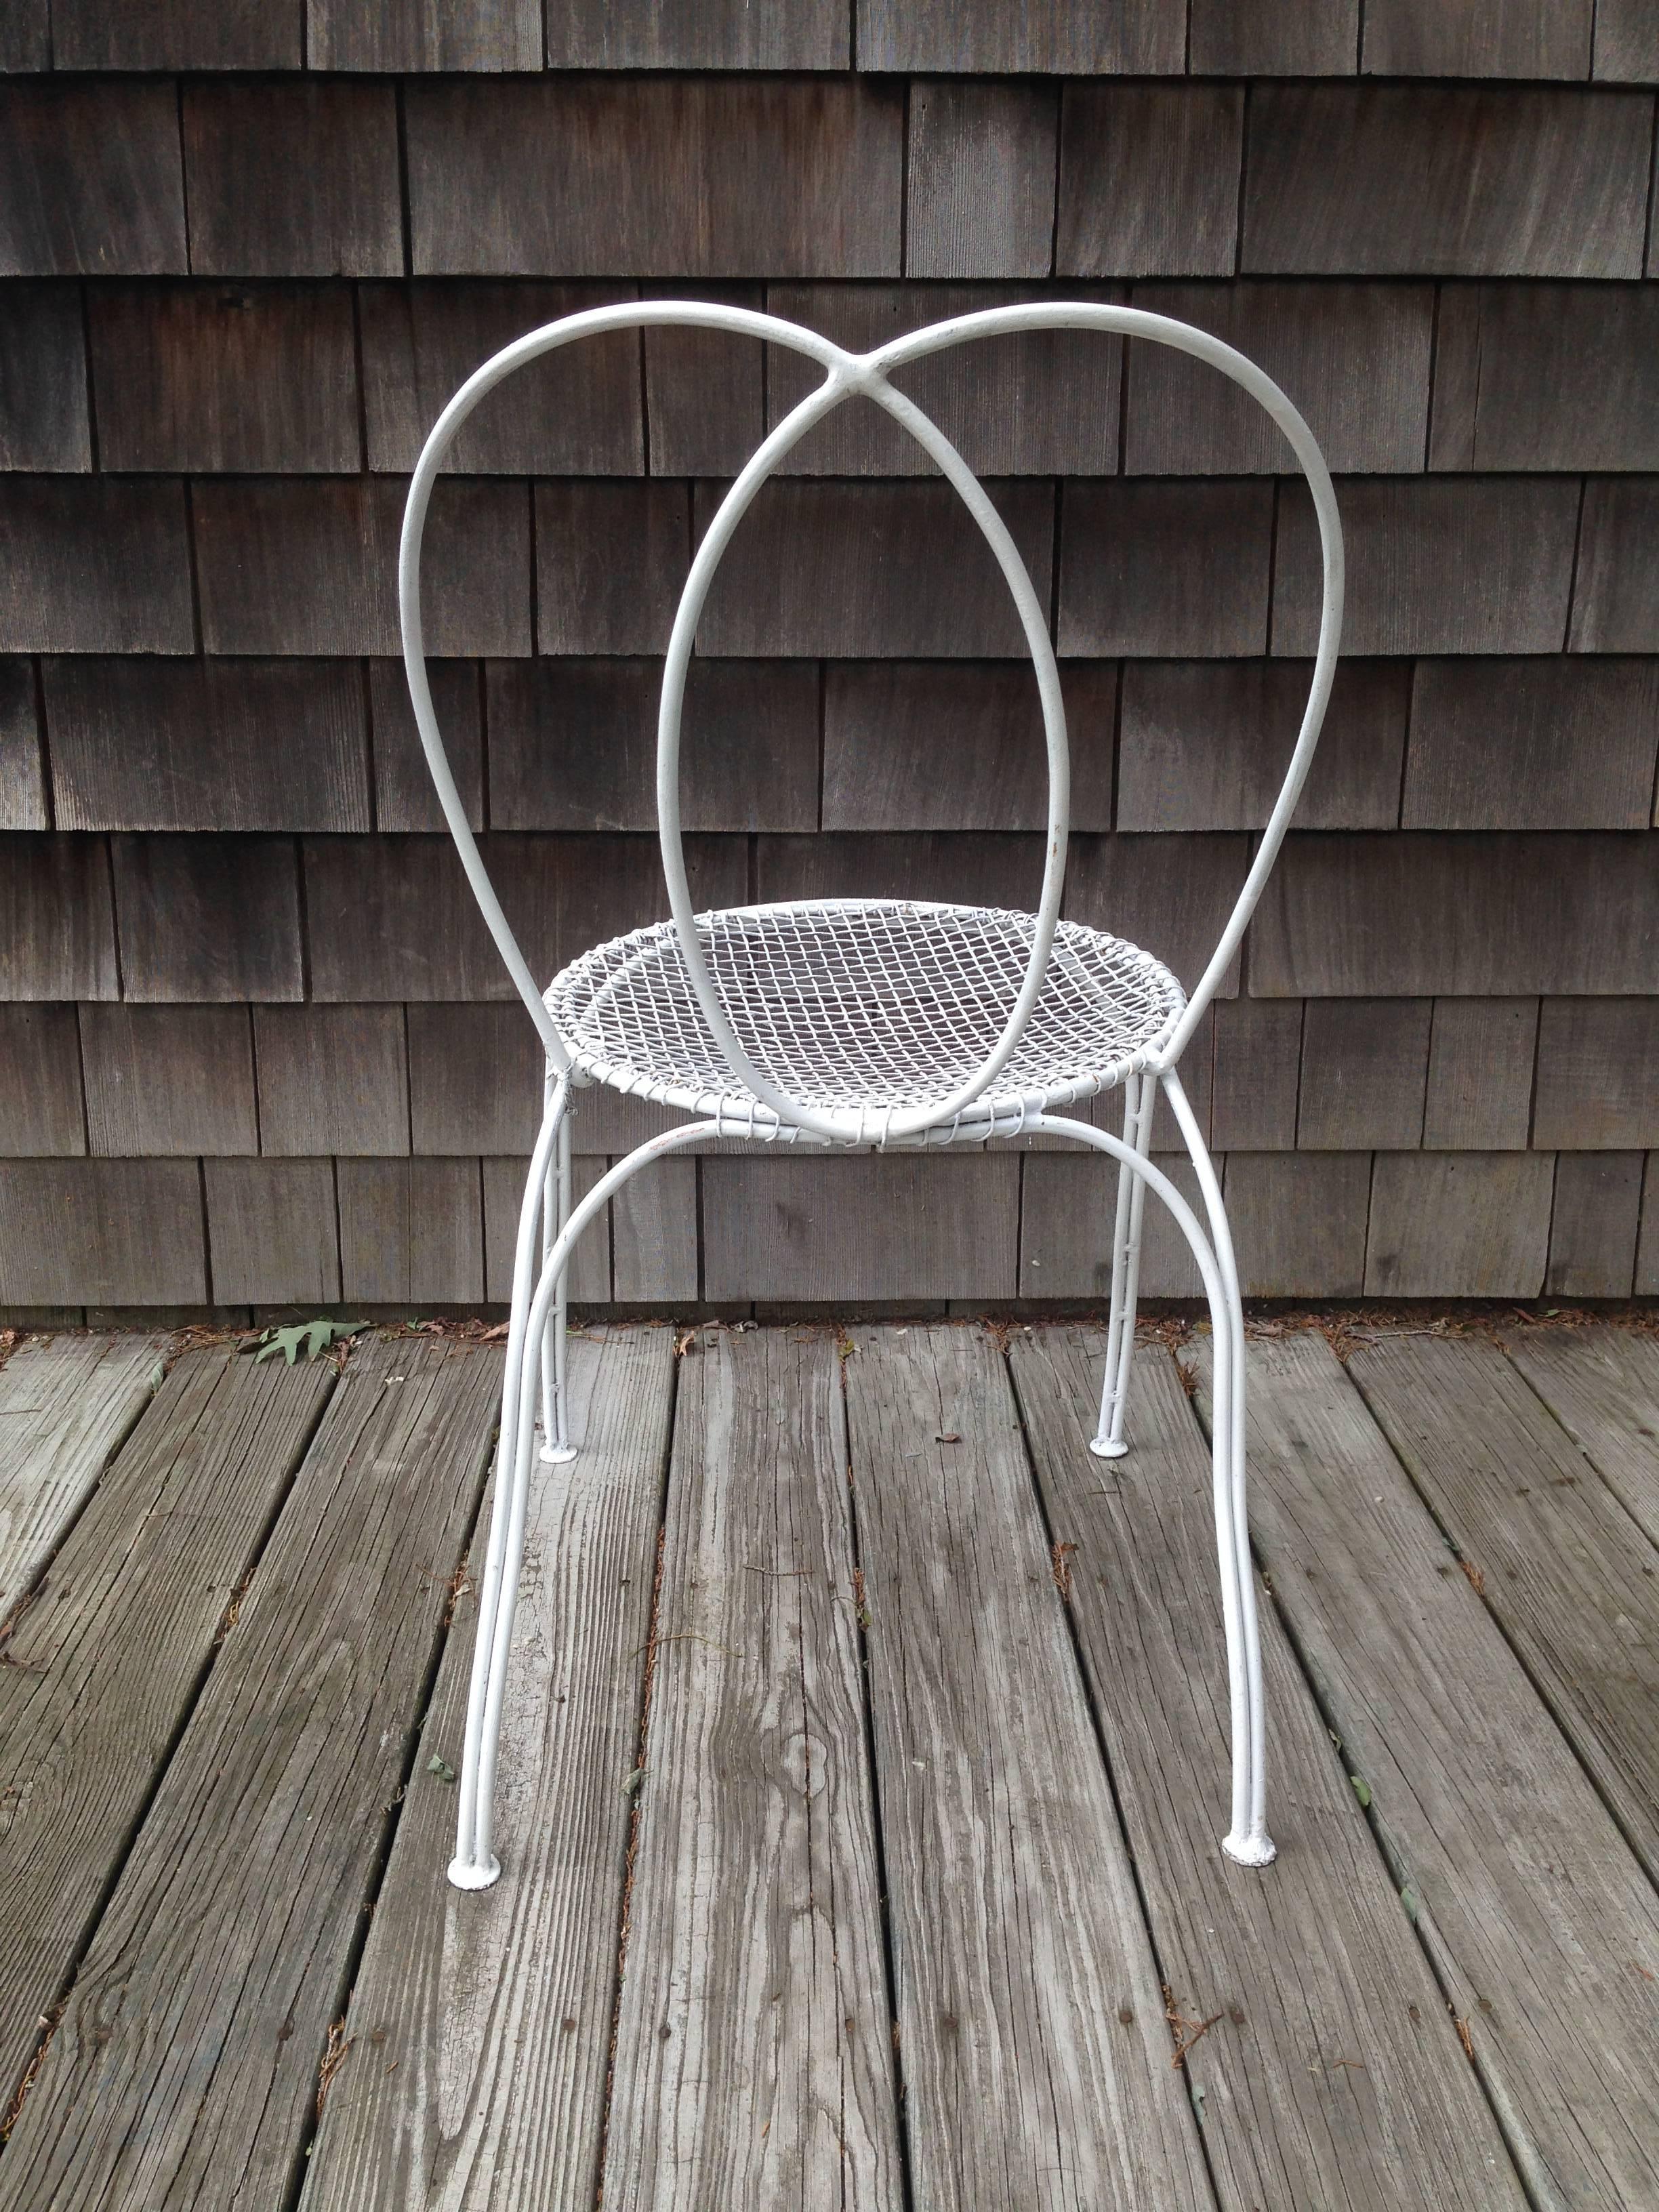 Set of Four 20th Century French Garden Chairs In Excellent Condition For Sale In Southampton, NY